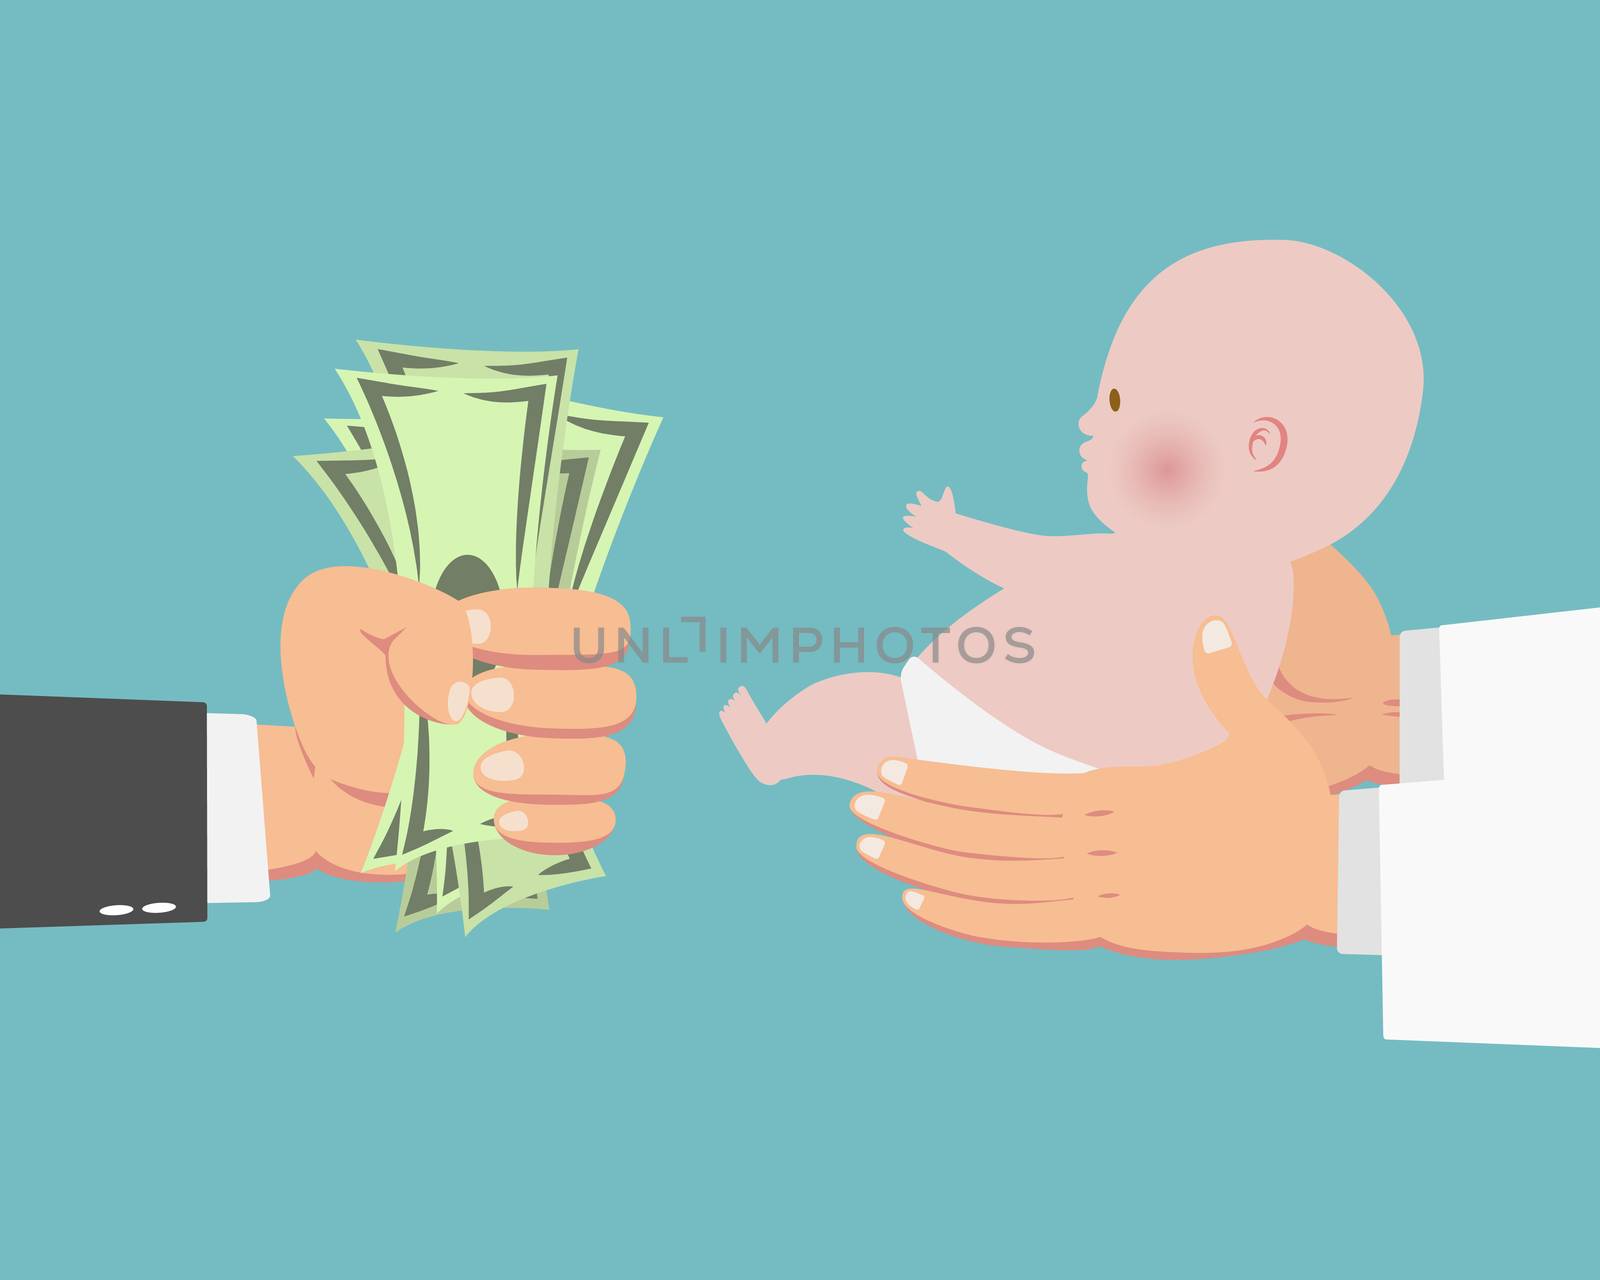 Hand of businessman with money and a baby in doctor's hands